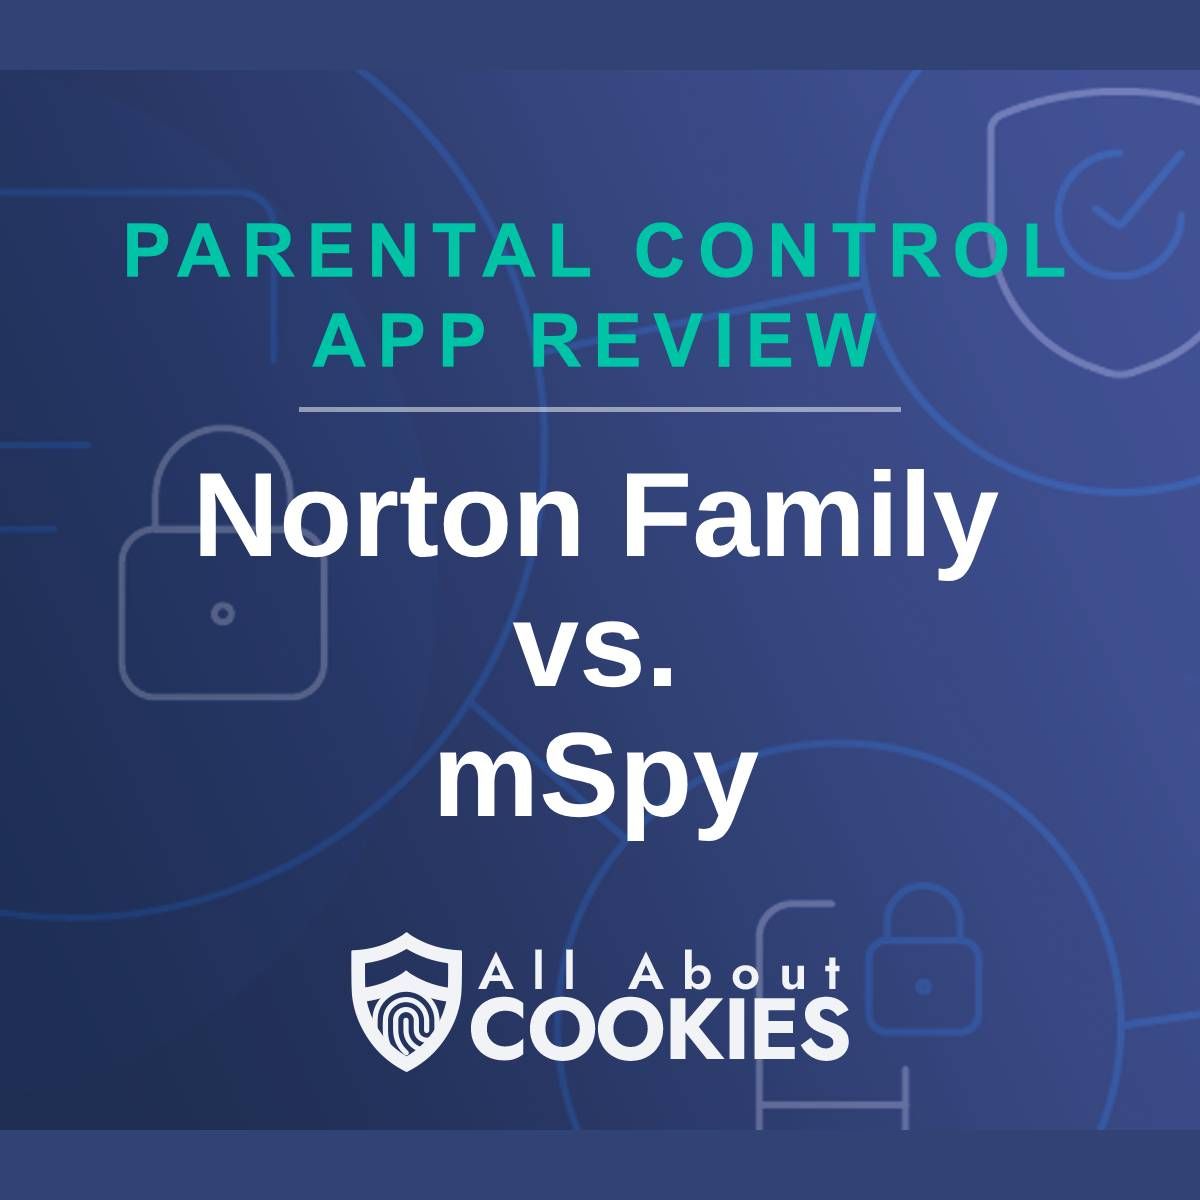 A blue background with images of locks and shields with the text &quot;Parental Control App Review Norton Family vs. mSpy&quot; and the All About Cookies logo.